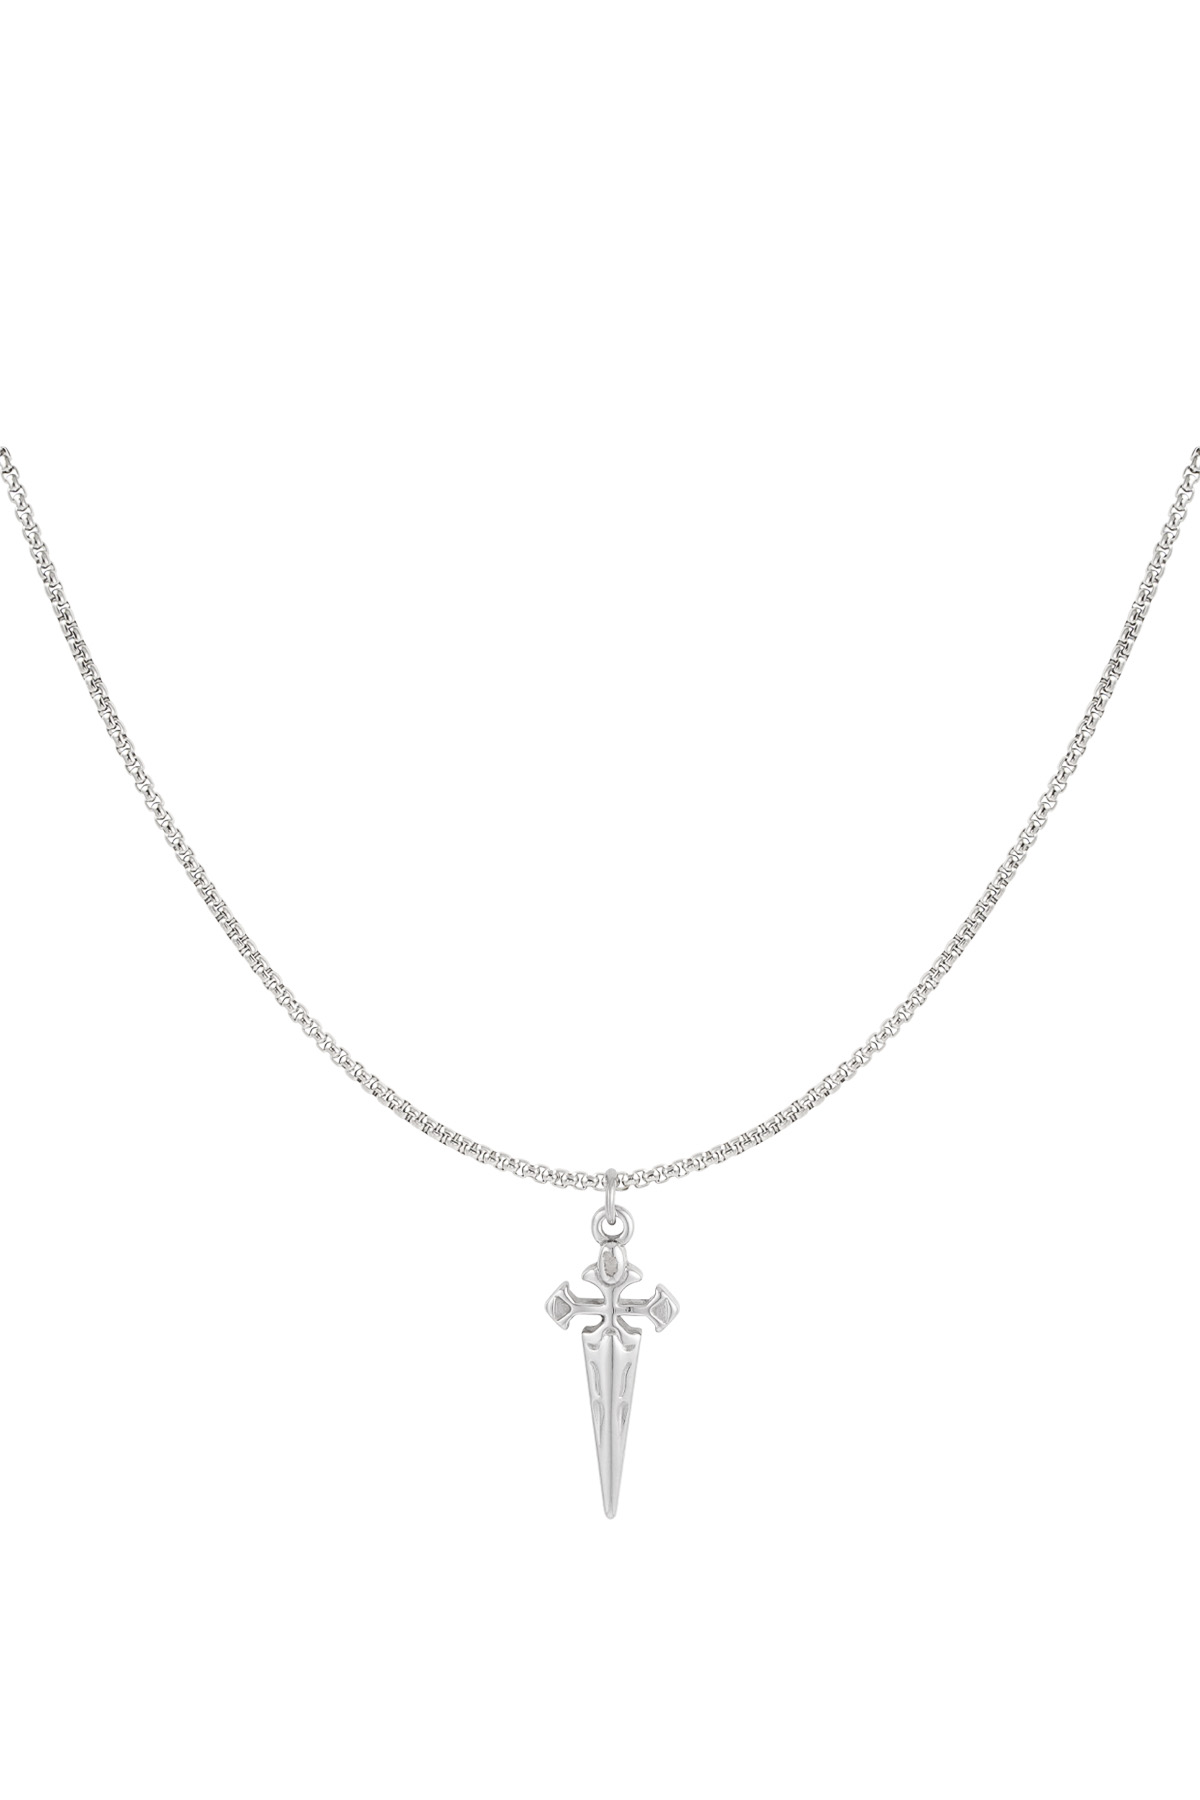 Simple men's necklace with sword charm - silver 